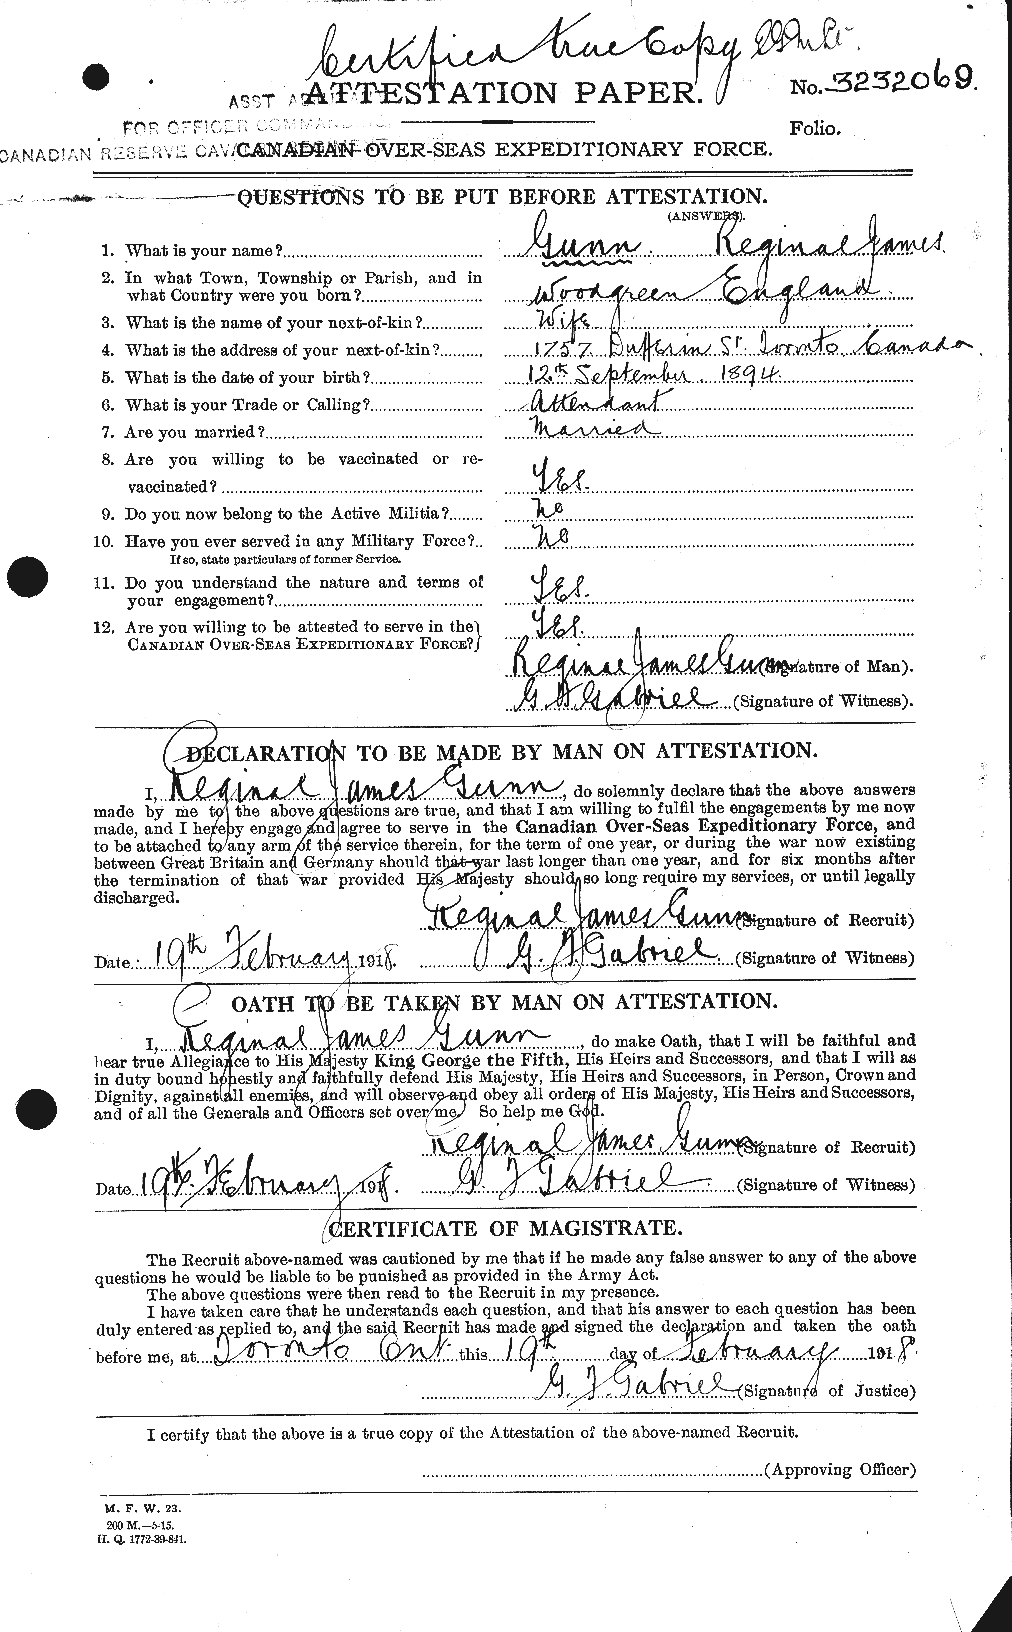 Personnel Records of the First World War - CEF 369321a